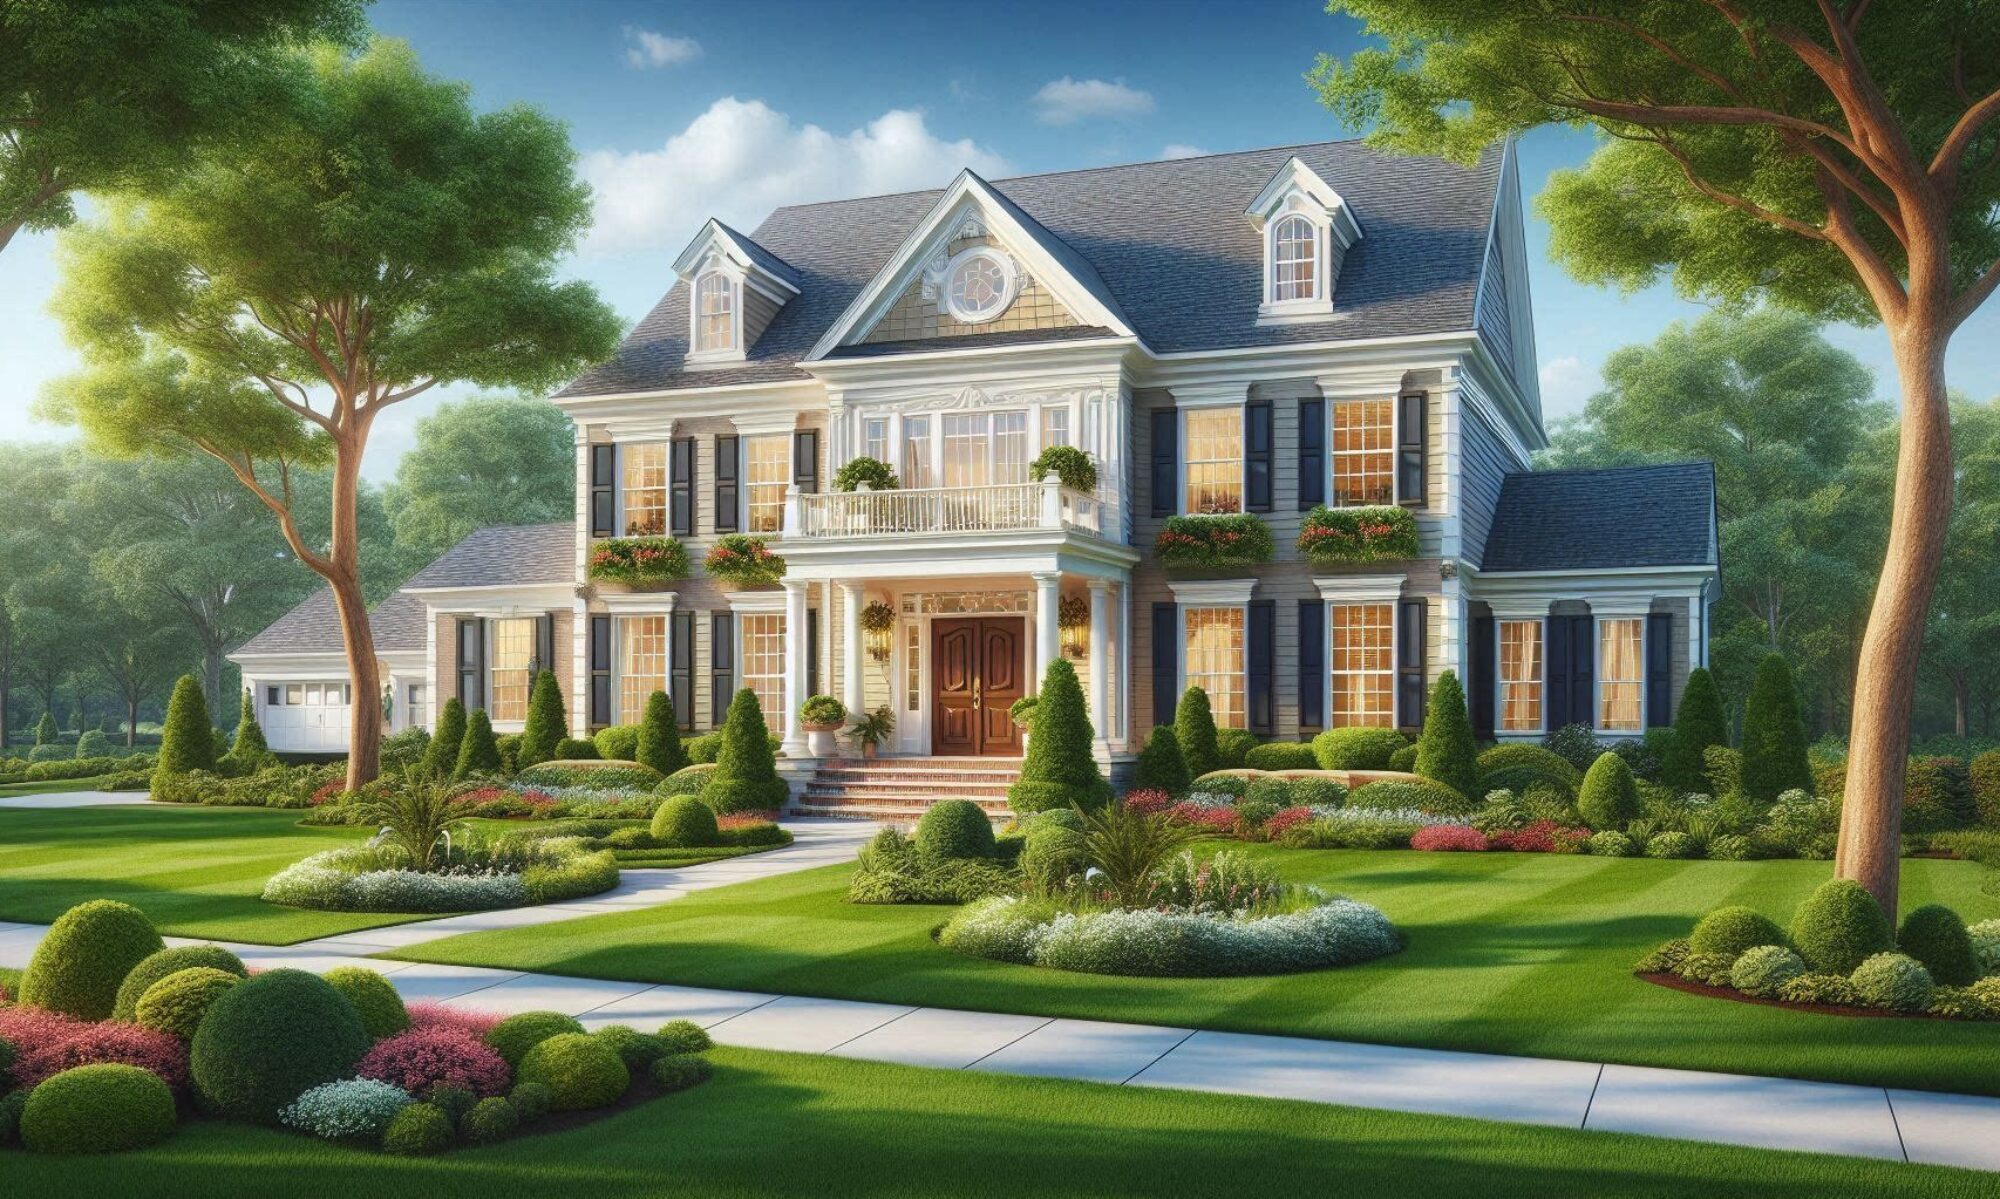 Upscale 2-story colonial style home with great curb appeal - This image created for Decora Photography by AI